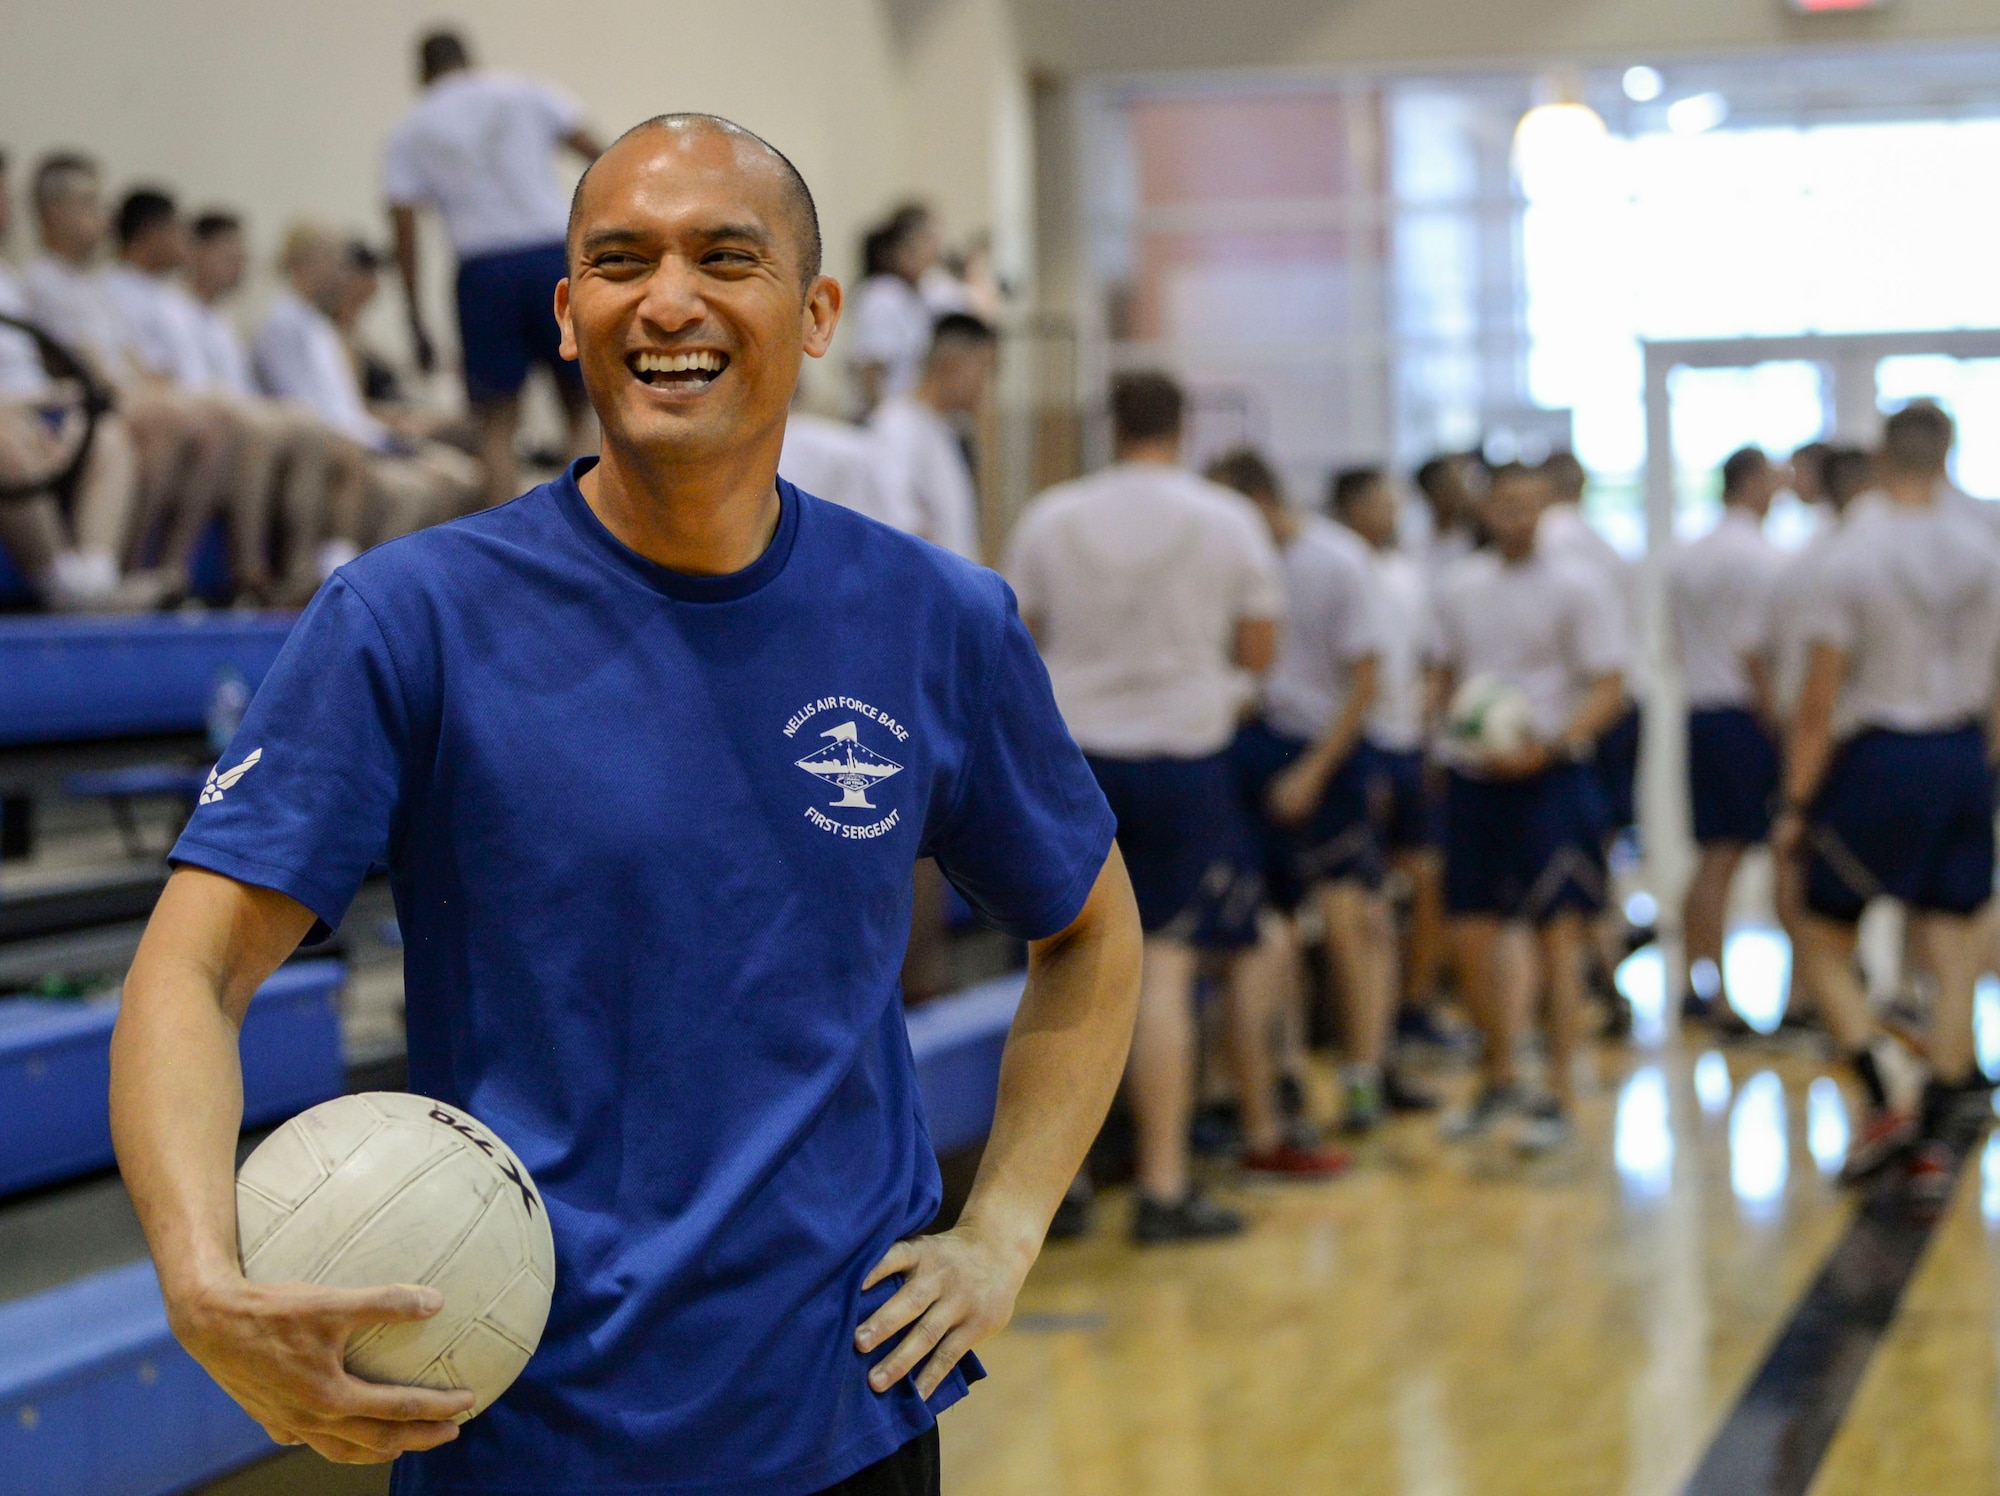 Master Sgt. Jonathan Baysa, 57th Operations Group first sergeant, takes part in a volleyball game with Airmen graduating from the Airmen Leadership School at the Warrior Fitness Center on Nellis Air Force Base, Nevada, May 9, 2018. The volleyball game is one of many activities first shirts engage in to boost morale. (U.S. Air Force photo by Airman Bailee A. Darbasie)